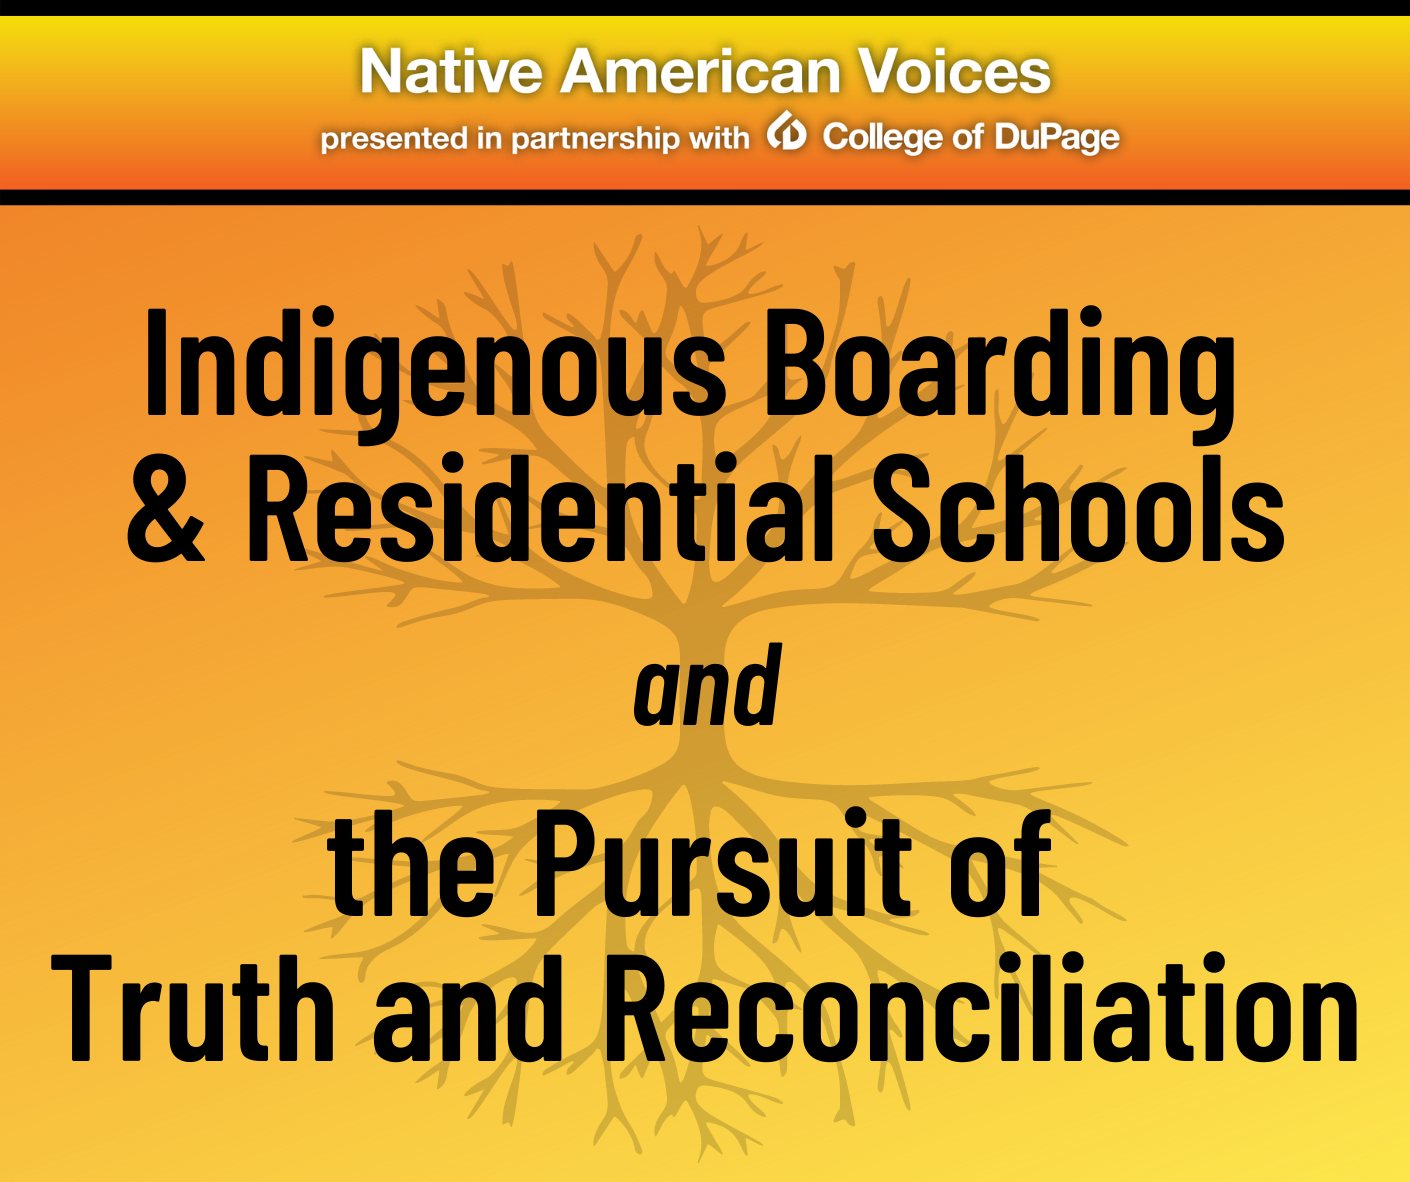 Native American Voices Webinar Series:  Indigenous Boarding and Residential Schools & the Pursuit of Truth and Reconciliation